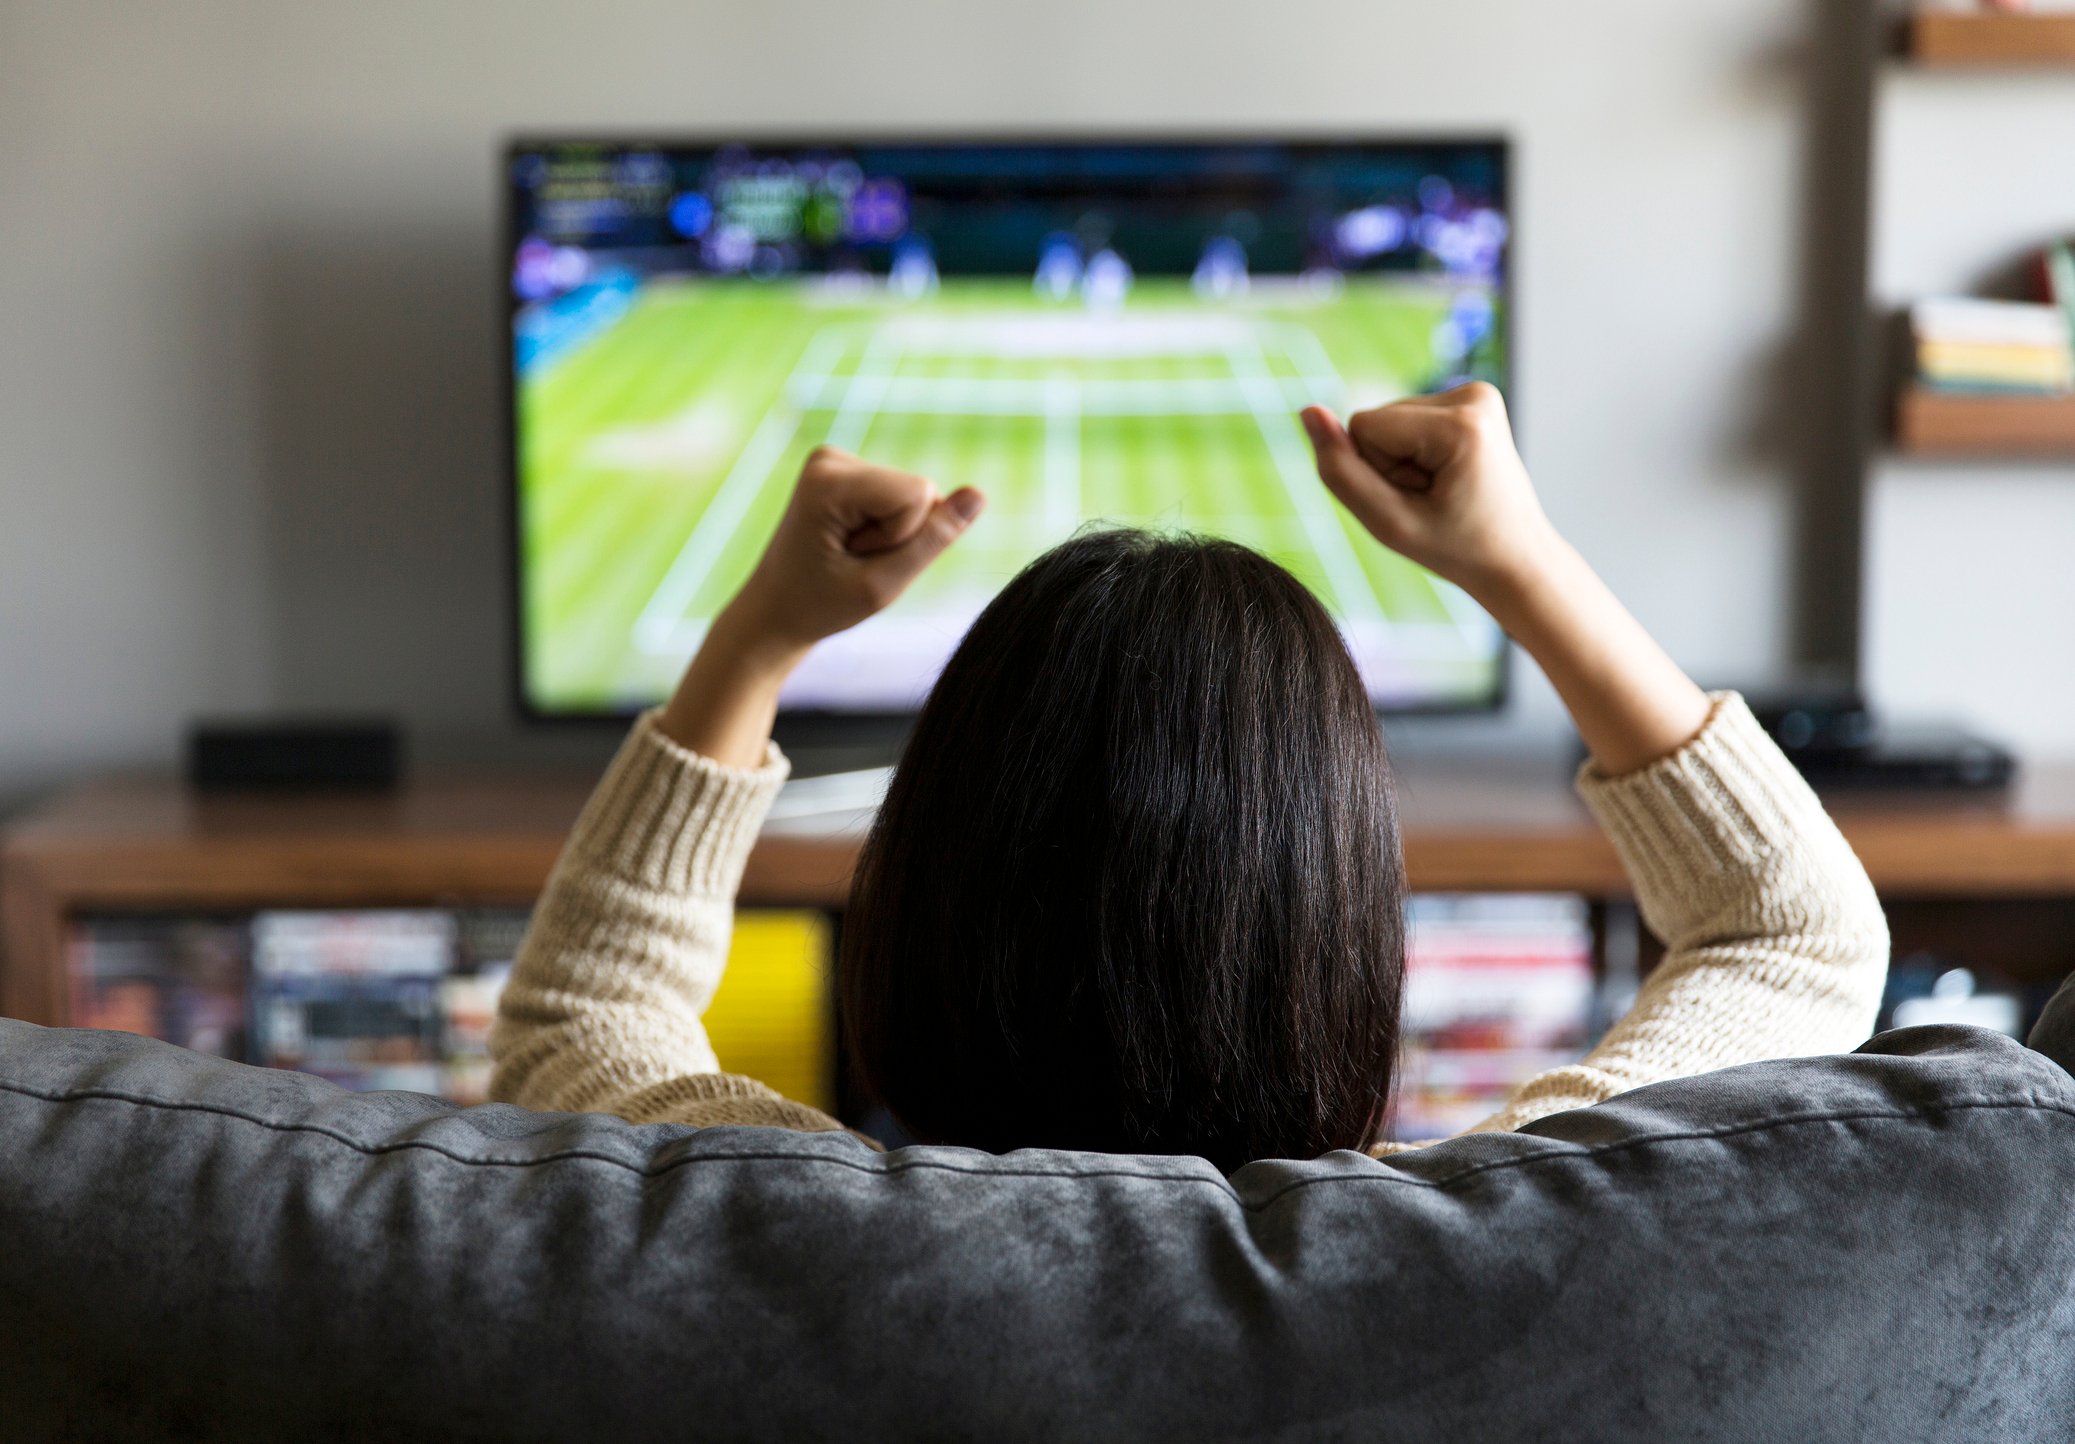 Audience Insights: A Starting Five of Facts About Female Sports Fans